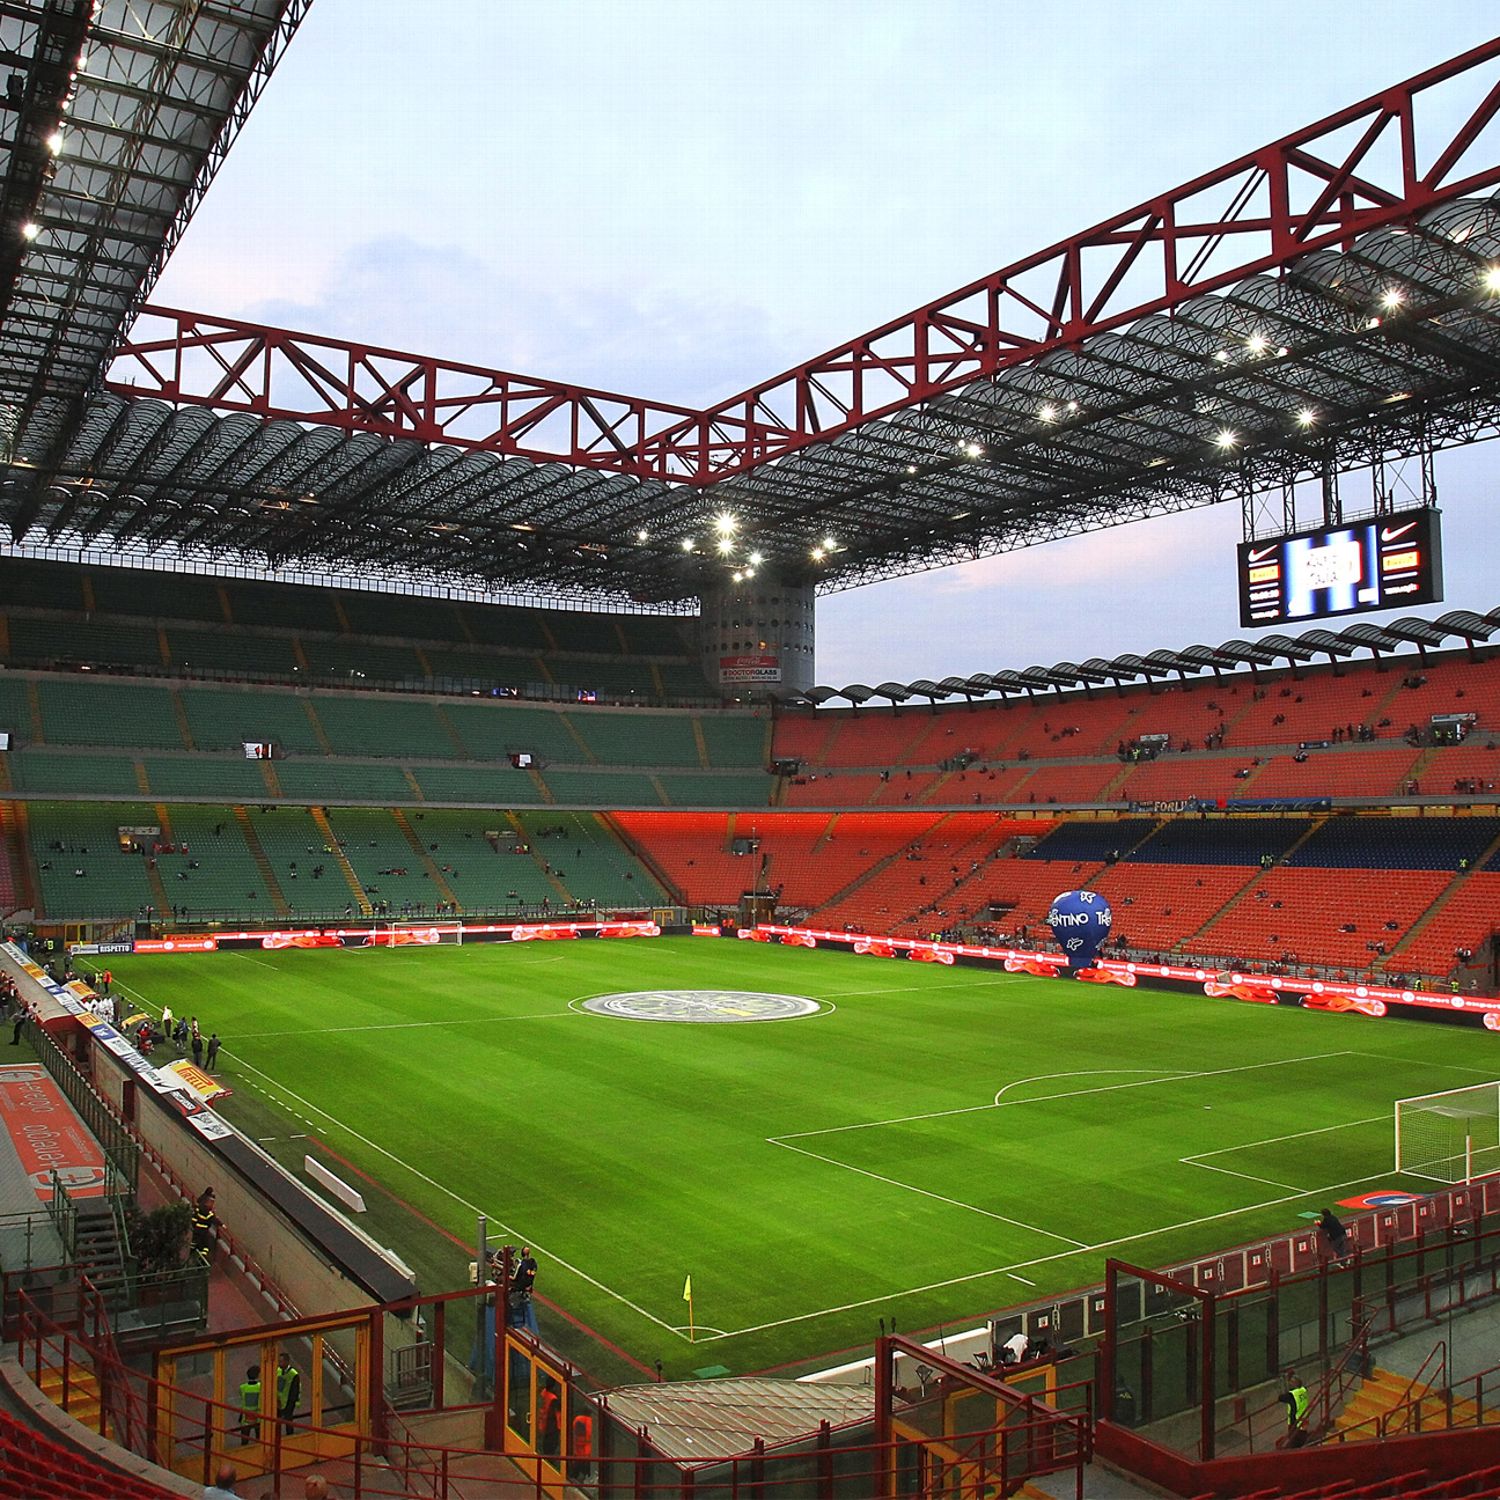 AC Milan stay at San Siro after scrapping new stadium plans - ESPN FC